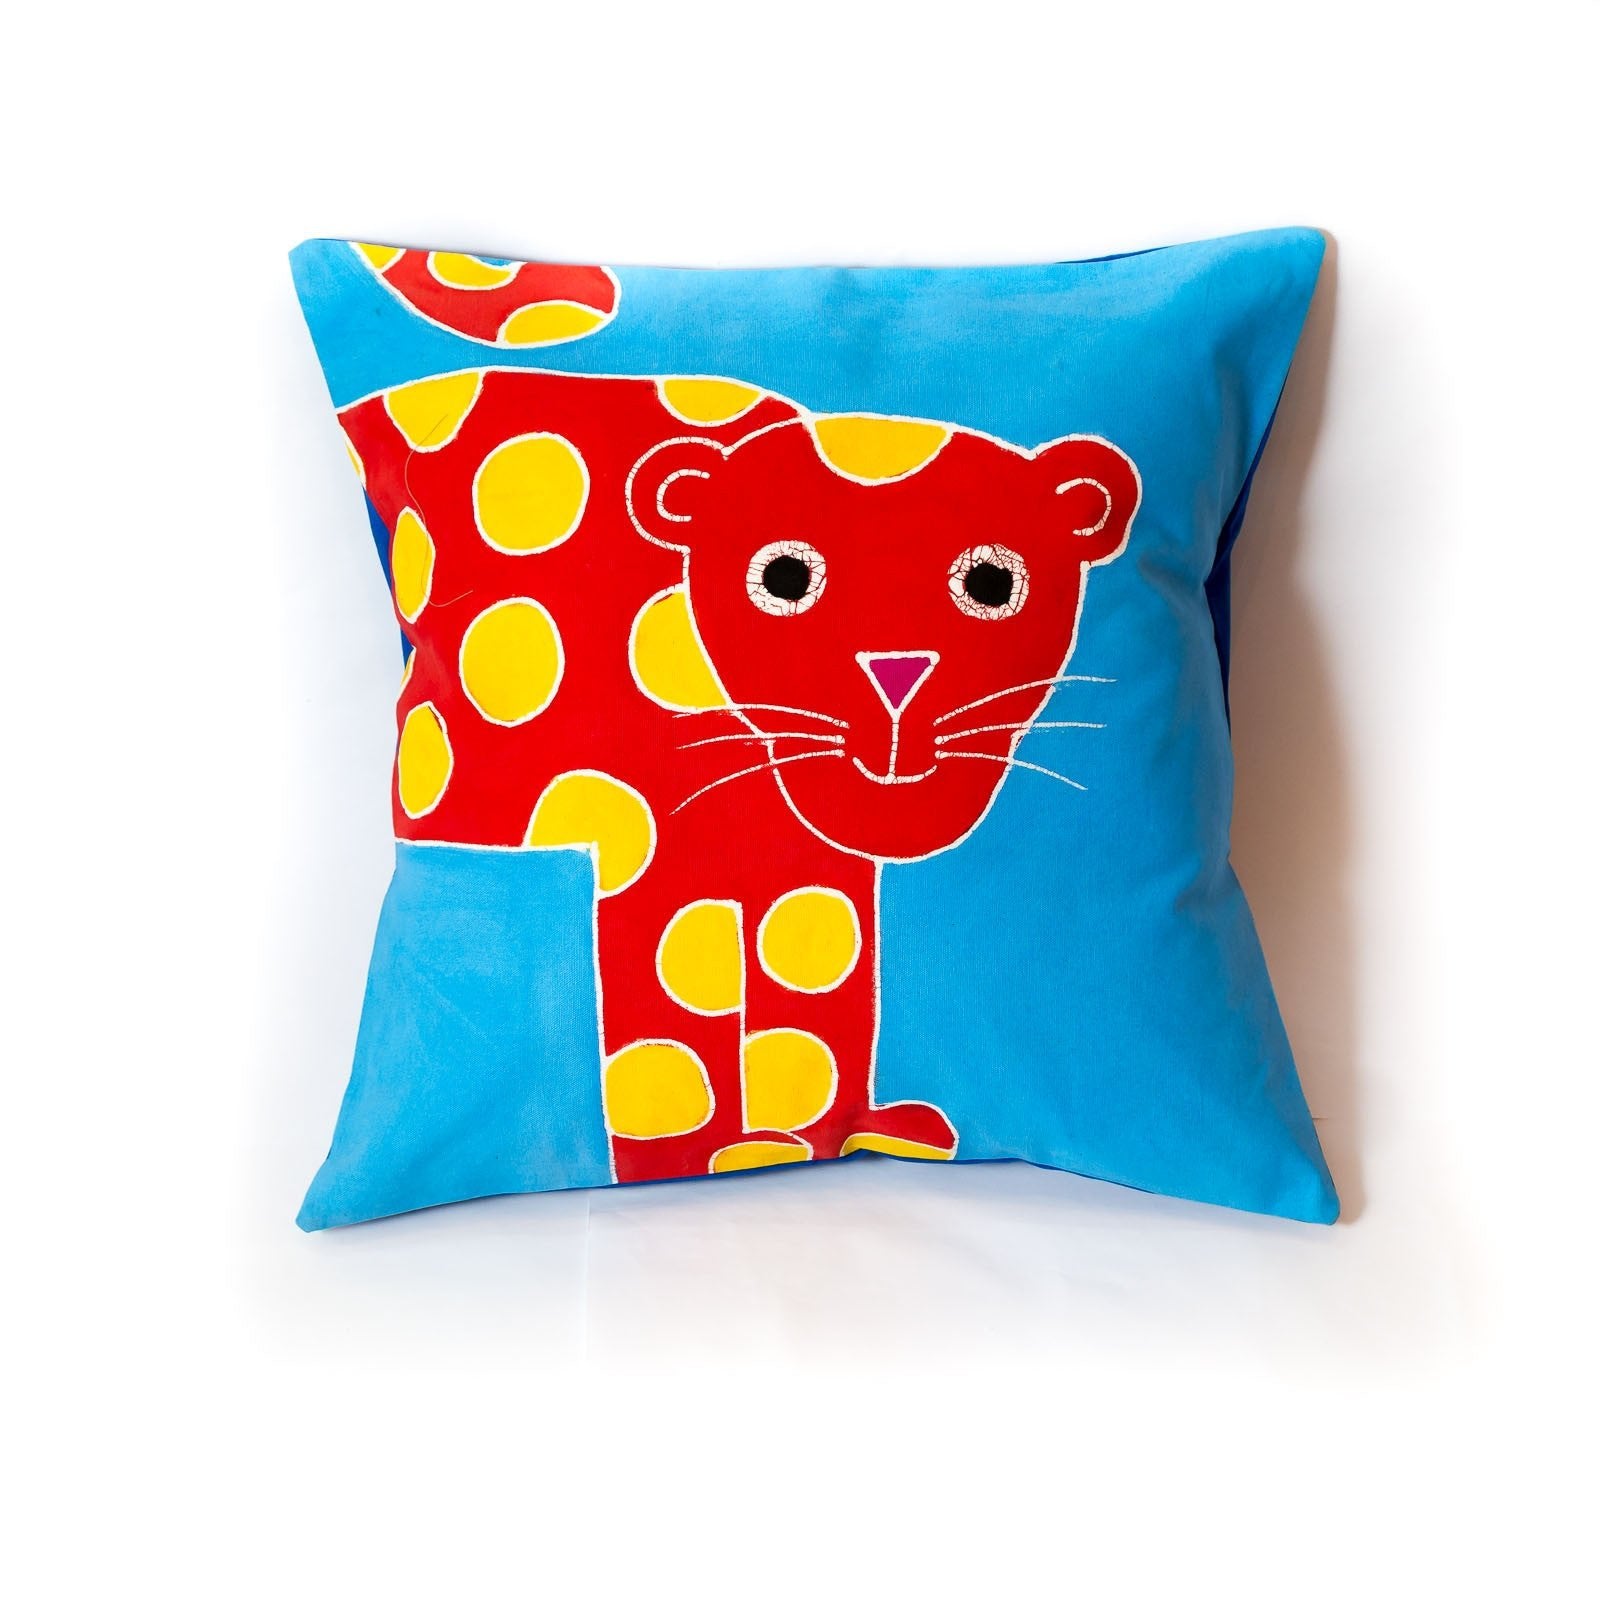 Safari Fun Leopard Cushion Cover - Hand Painted by TRIBAL TEXTILES - Handcrafted Home Decor Interiors - African Made